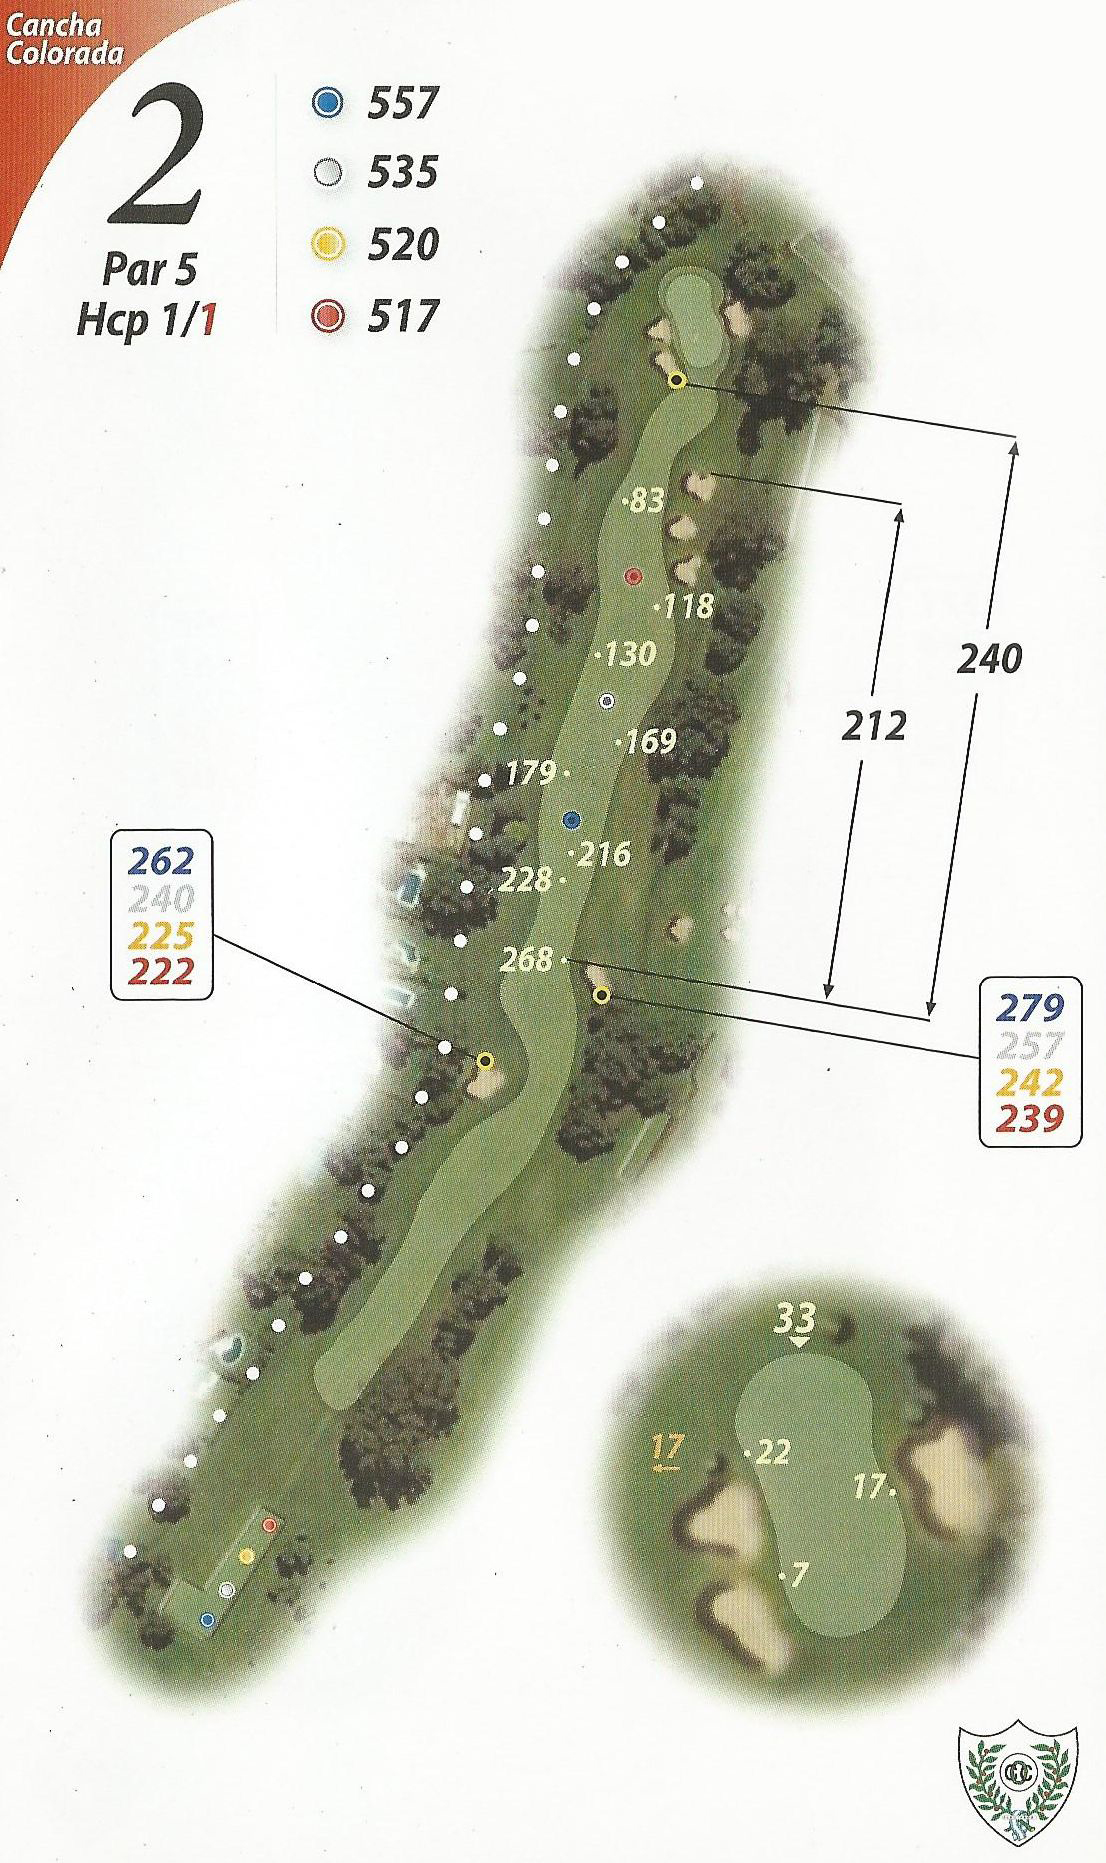 Hole 2 (red)